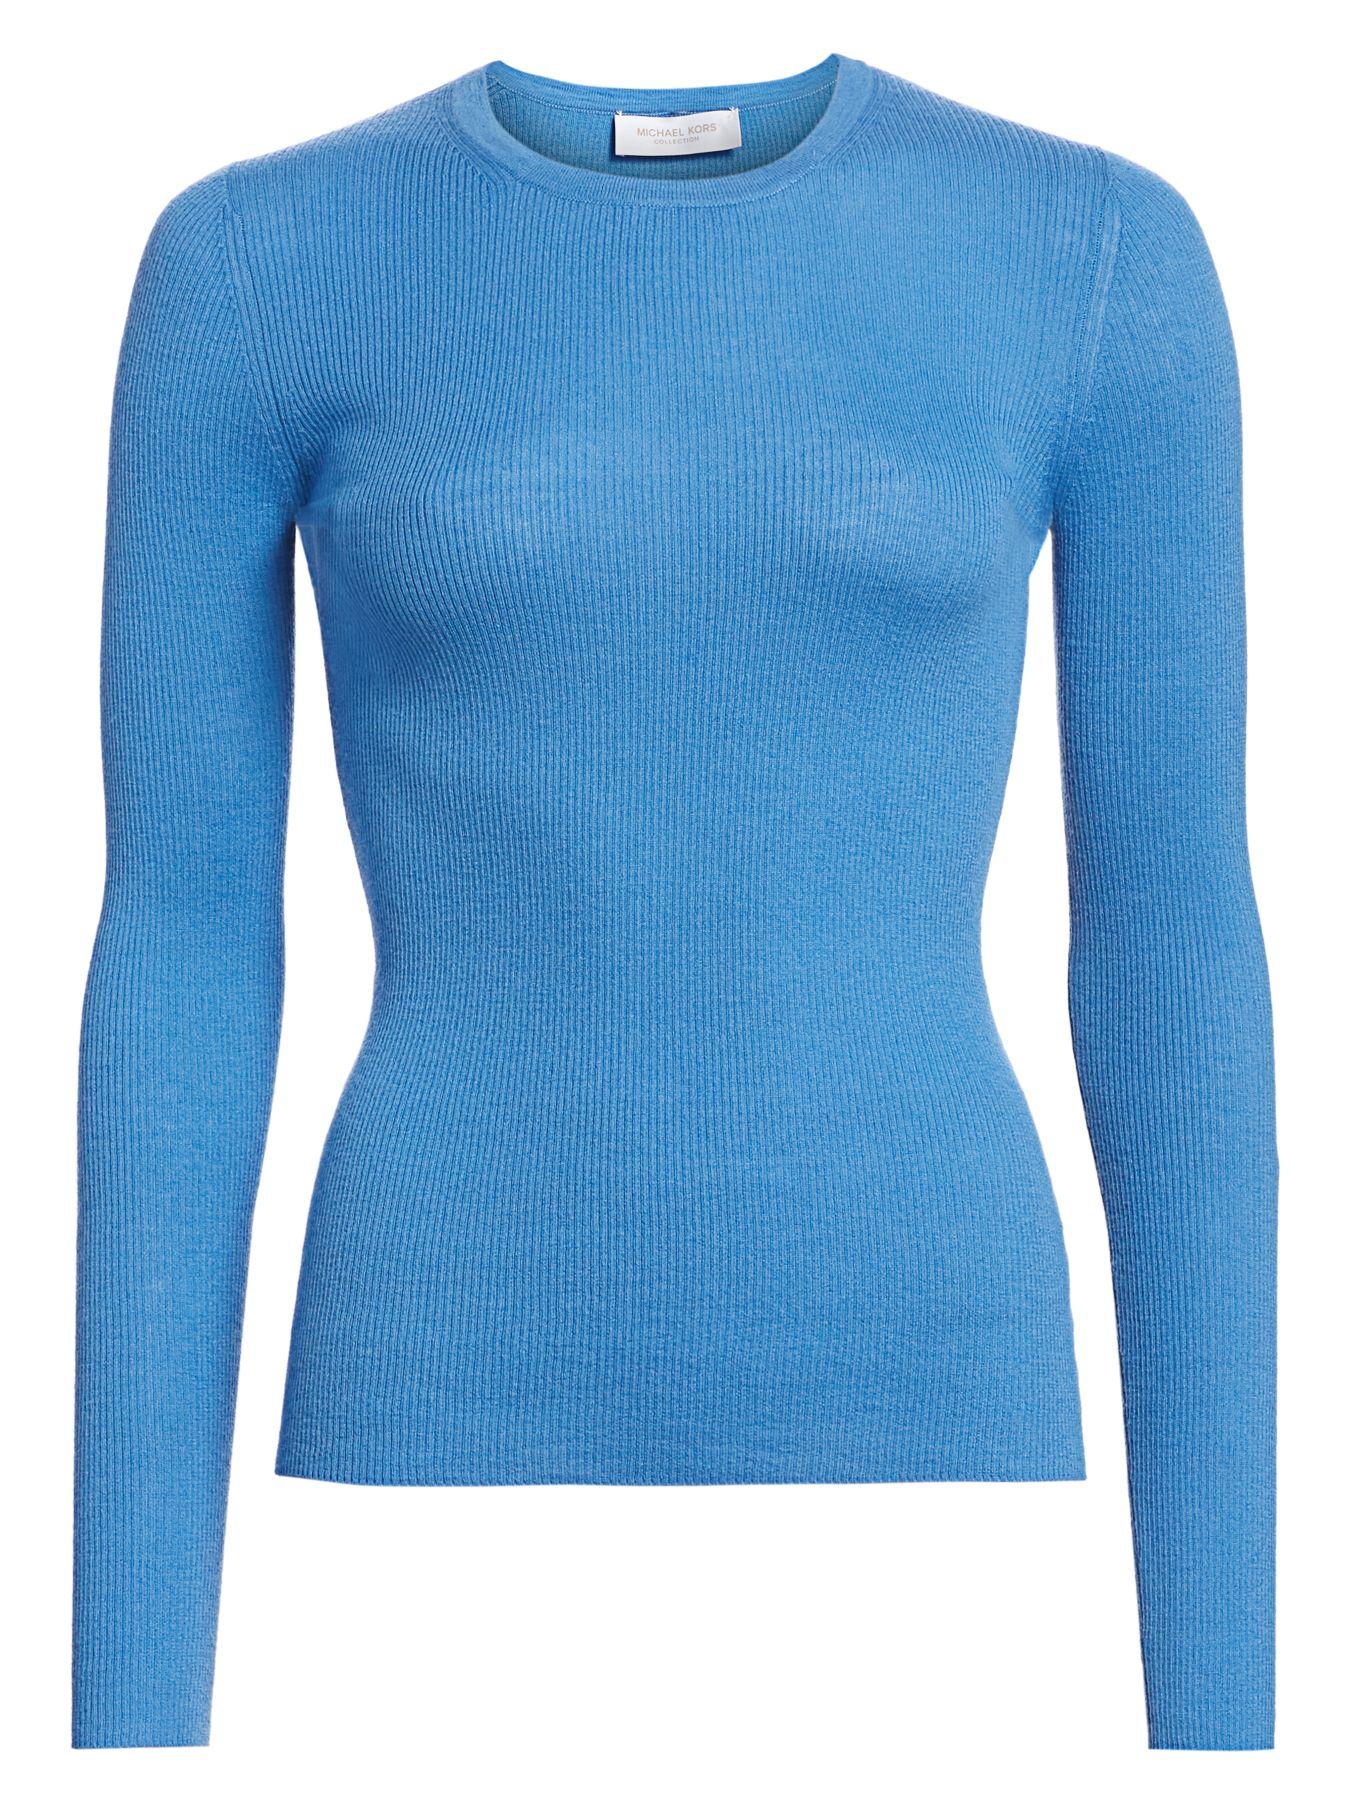 Michael Kors Ribbed Cashmere Knit Crewneck Sweater in Blue - Save 25% ...